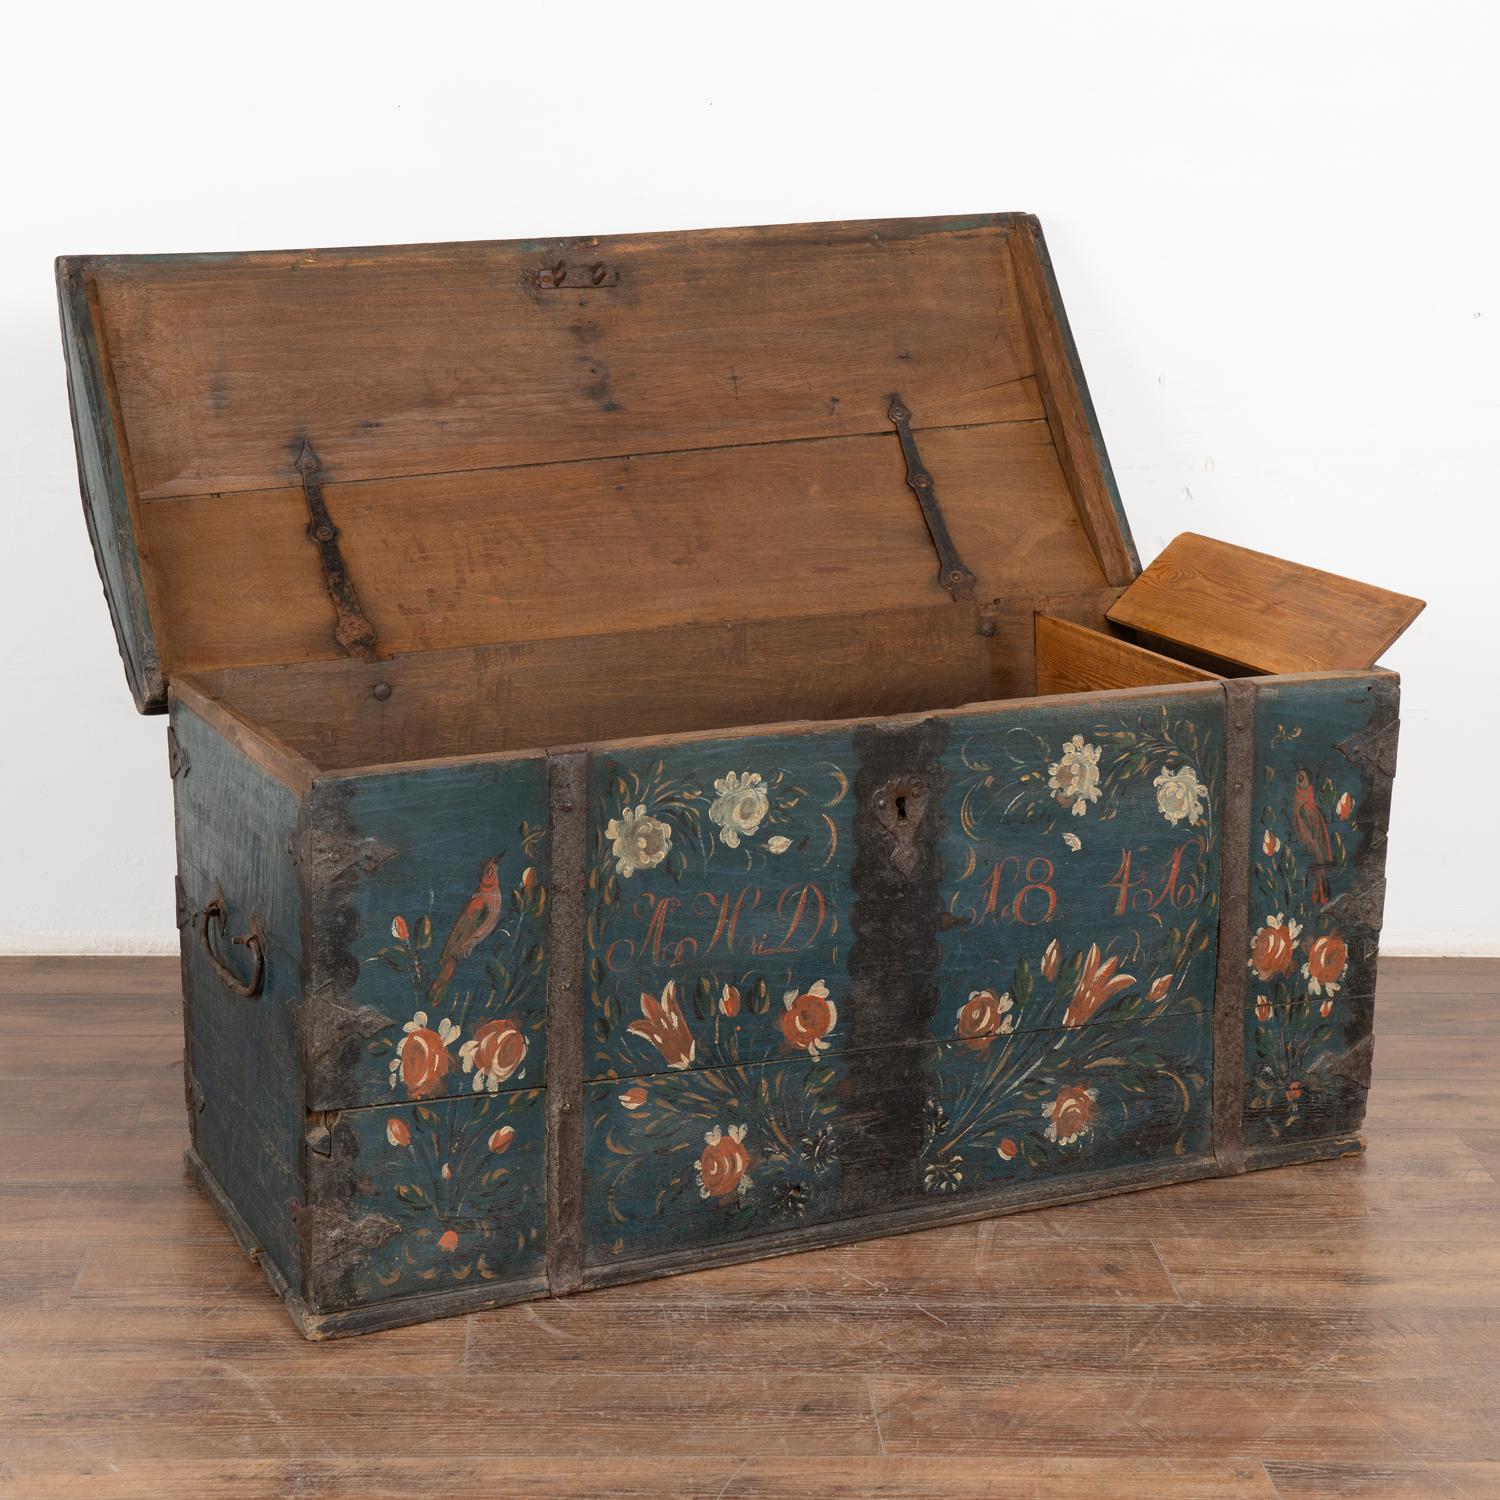 19th Century Original Painted Blue Dome Top Trunk with Birds and Flowers, Sweden dated 1841 For Sale